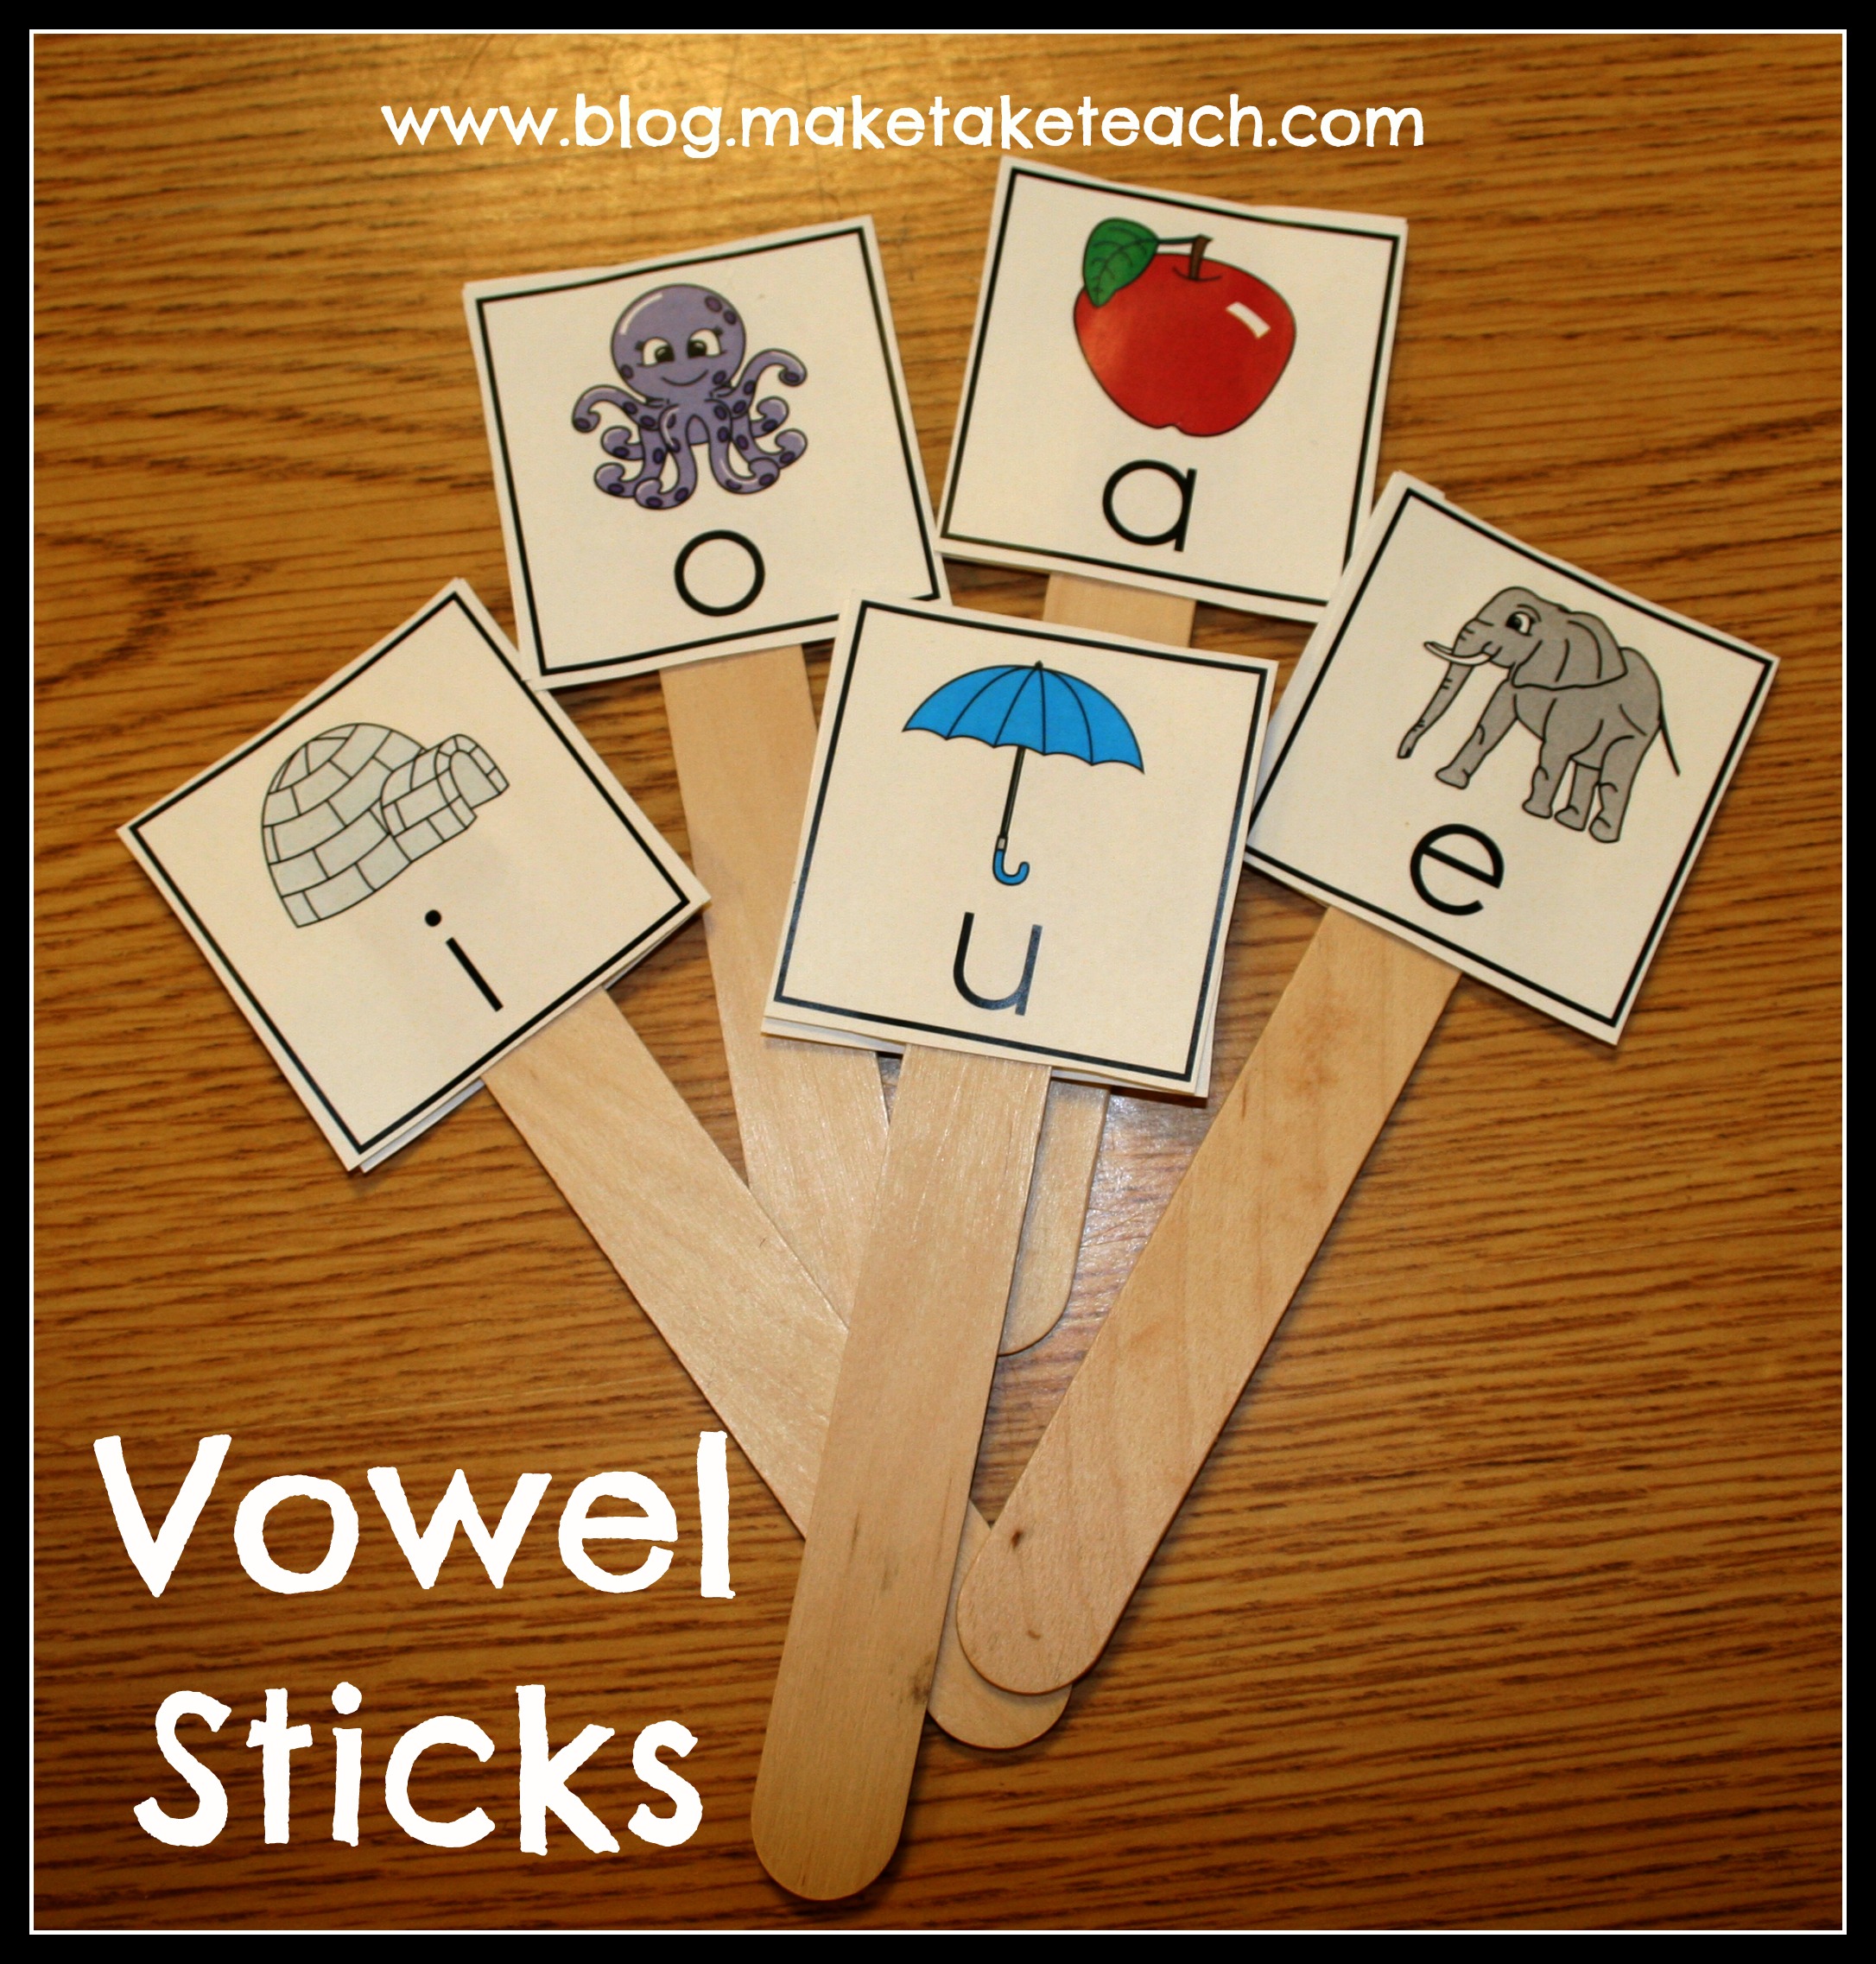 teaching-short-vowel-sounds-perfect-practice-makes-perfect-make-take-teach